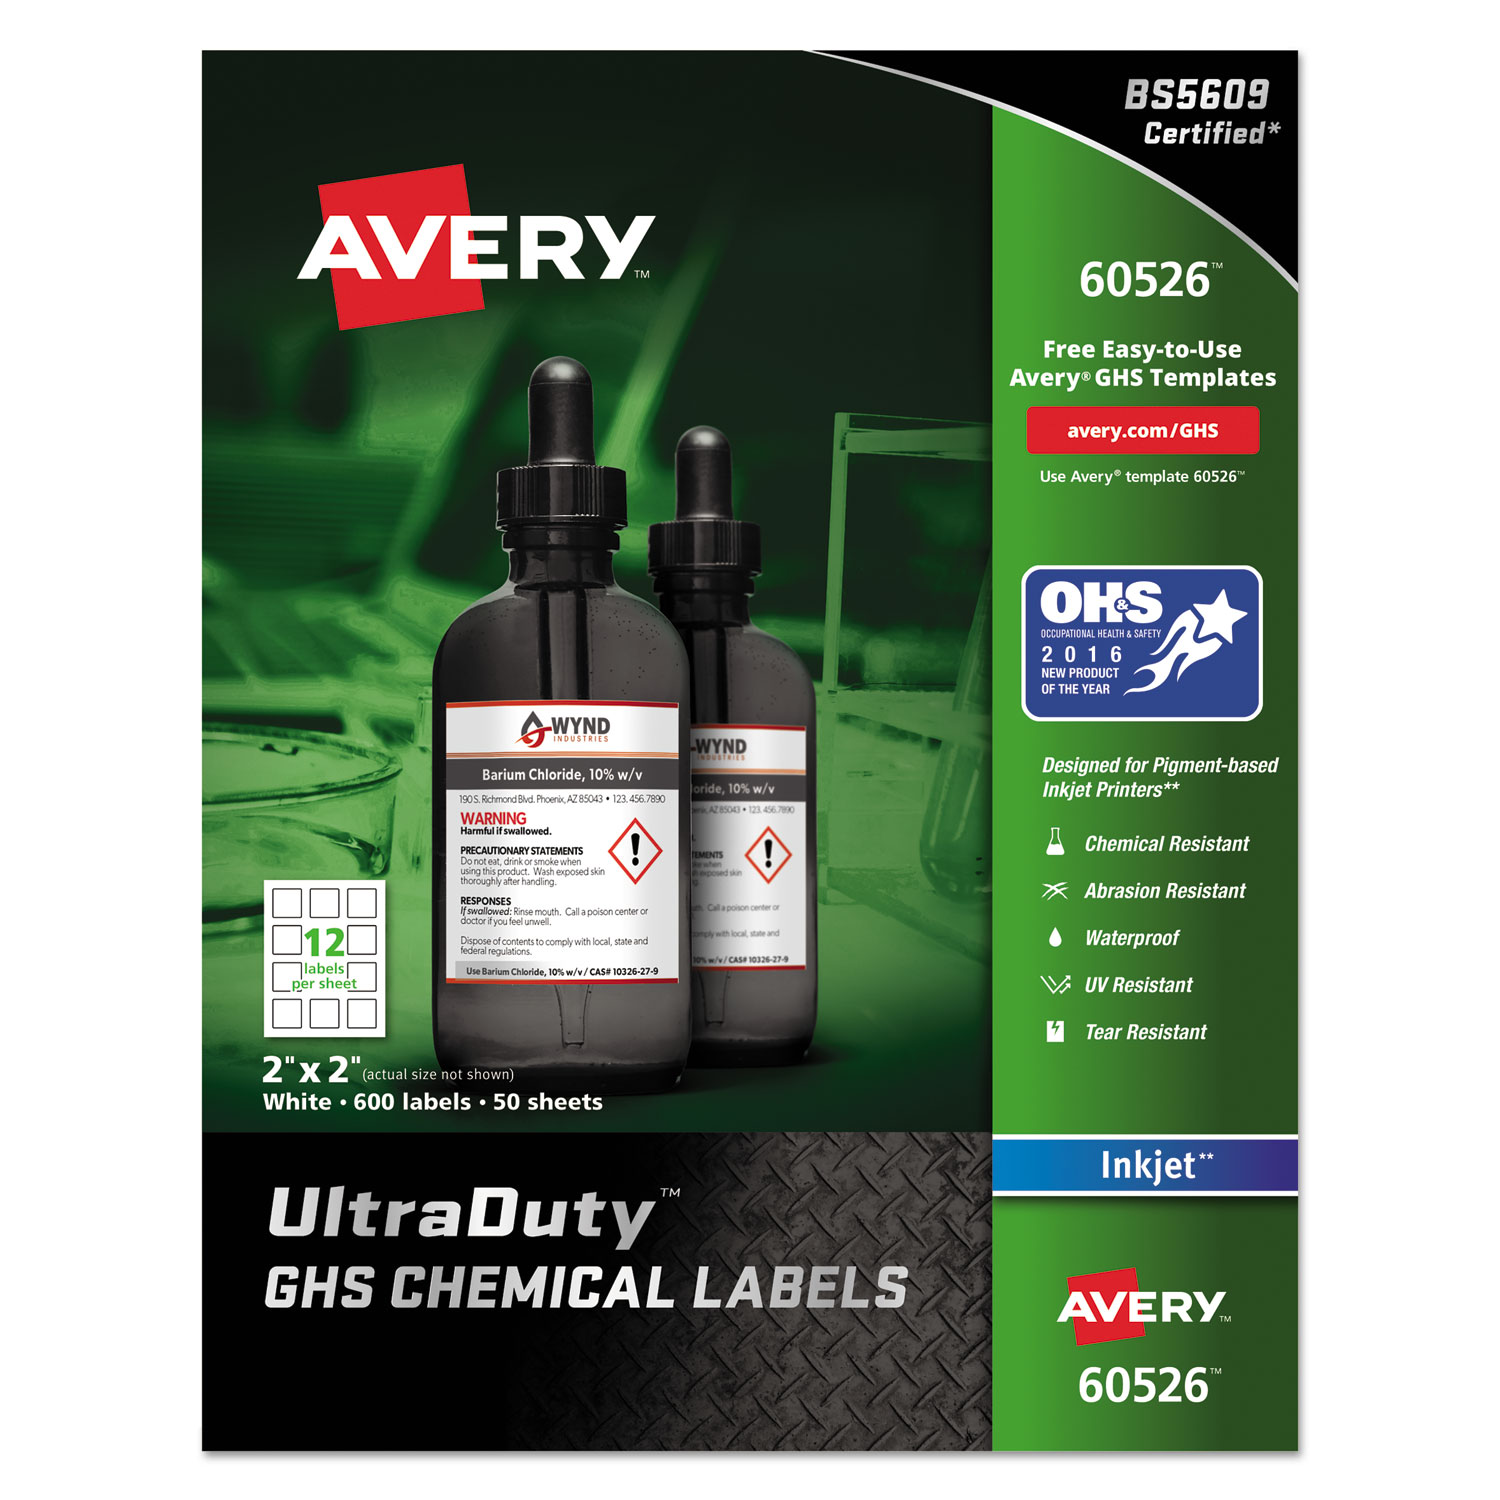  Avery 60526 UltraDuty GHS Chemical Waterproof and UV Resistant Labels, 2 x 2, White, 12/Sheet, 50 Sheets/Pack (AVE60526) 